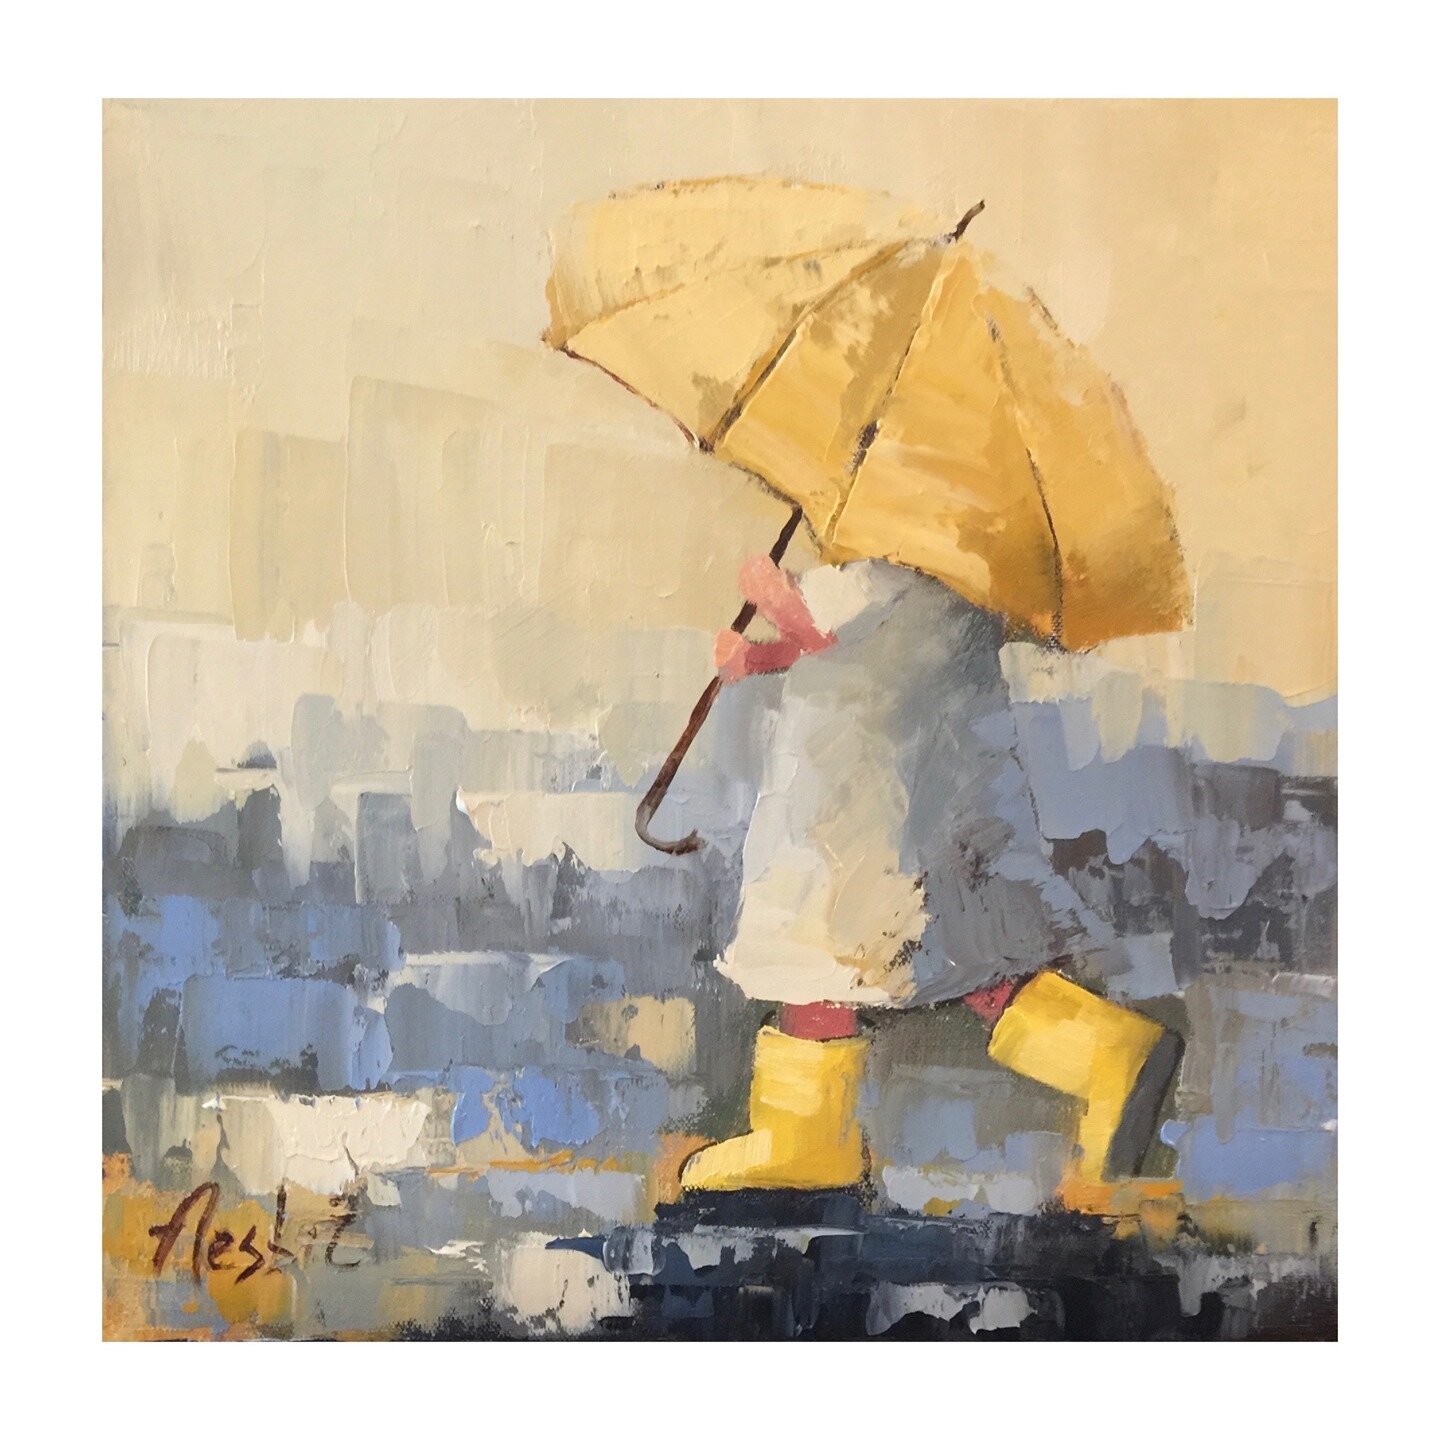 RAIN RAIN GO AWAY!  Wishing for Sunny Skies today!  This painting came to mind on my walk this morning.  It has been a really long while since I have painted Umbrellas. I love the carefree nature of kids and the umbrella adds a fun element to paint e